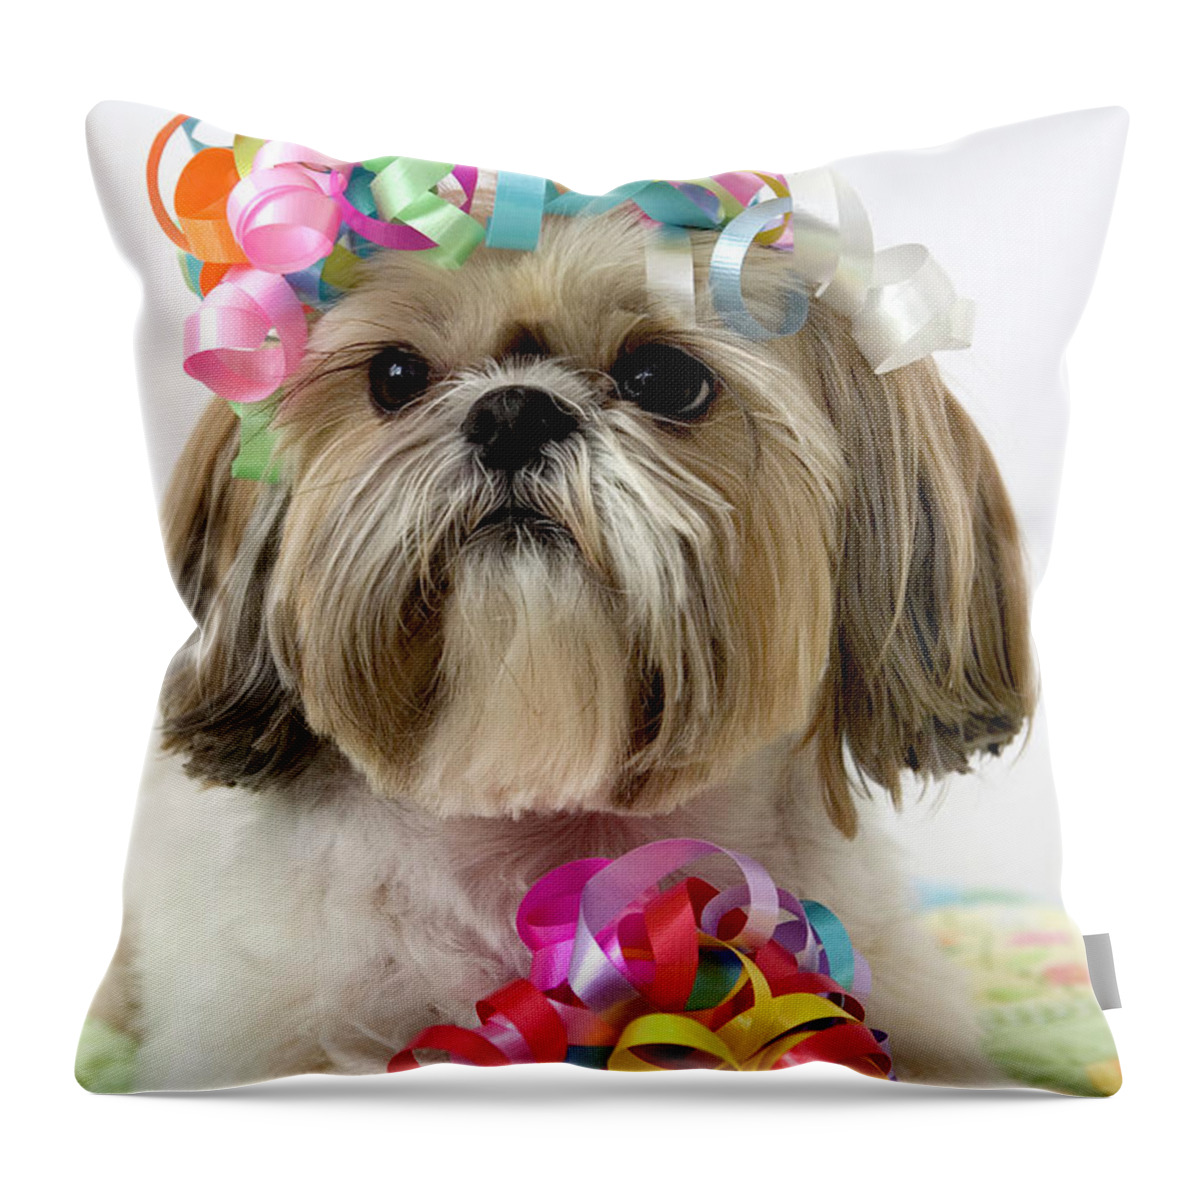 Pets Throw Pillow featuring the photograph Shih Tzu Dog by Geri Lavrov